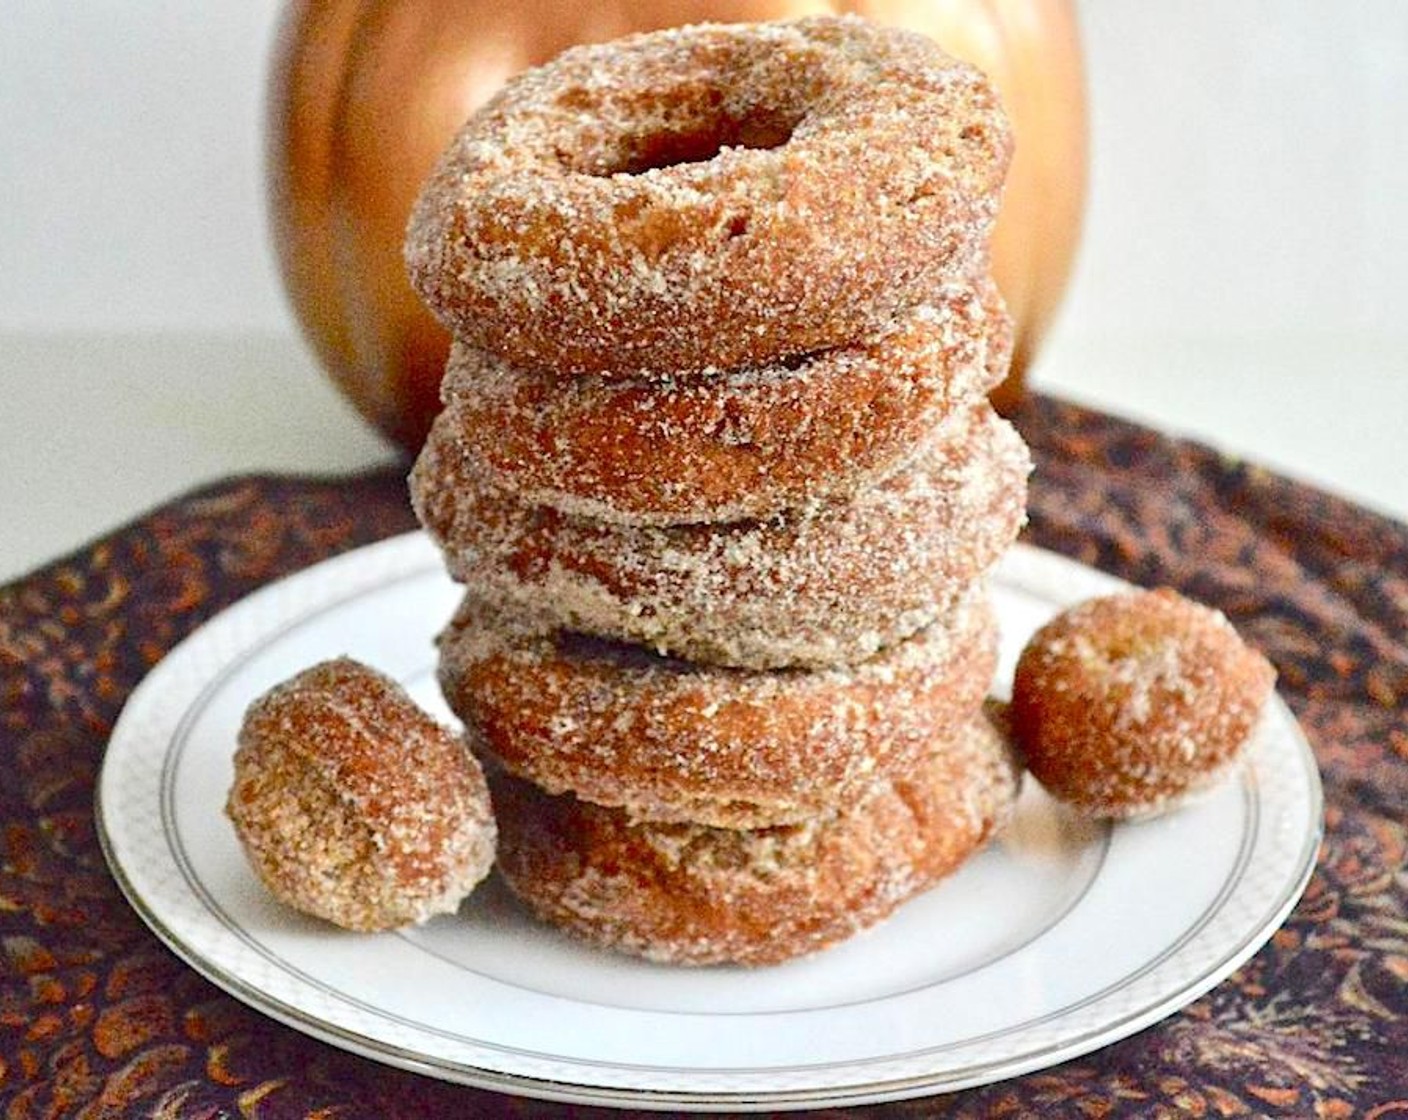 step 10 When the donuts are all fried, coat them all in the Granulated Sugar (1 cup) and Pumpkin Pie Spice (1/2 Tbsp). Serve immediately warm, enjoy!